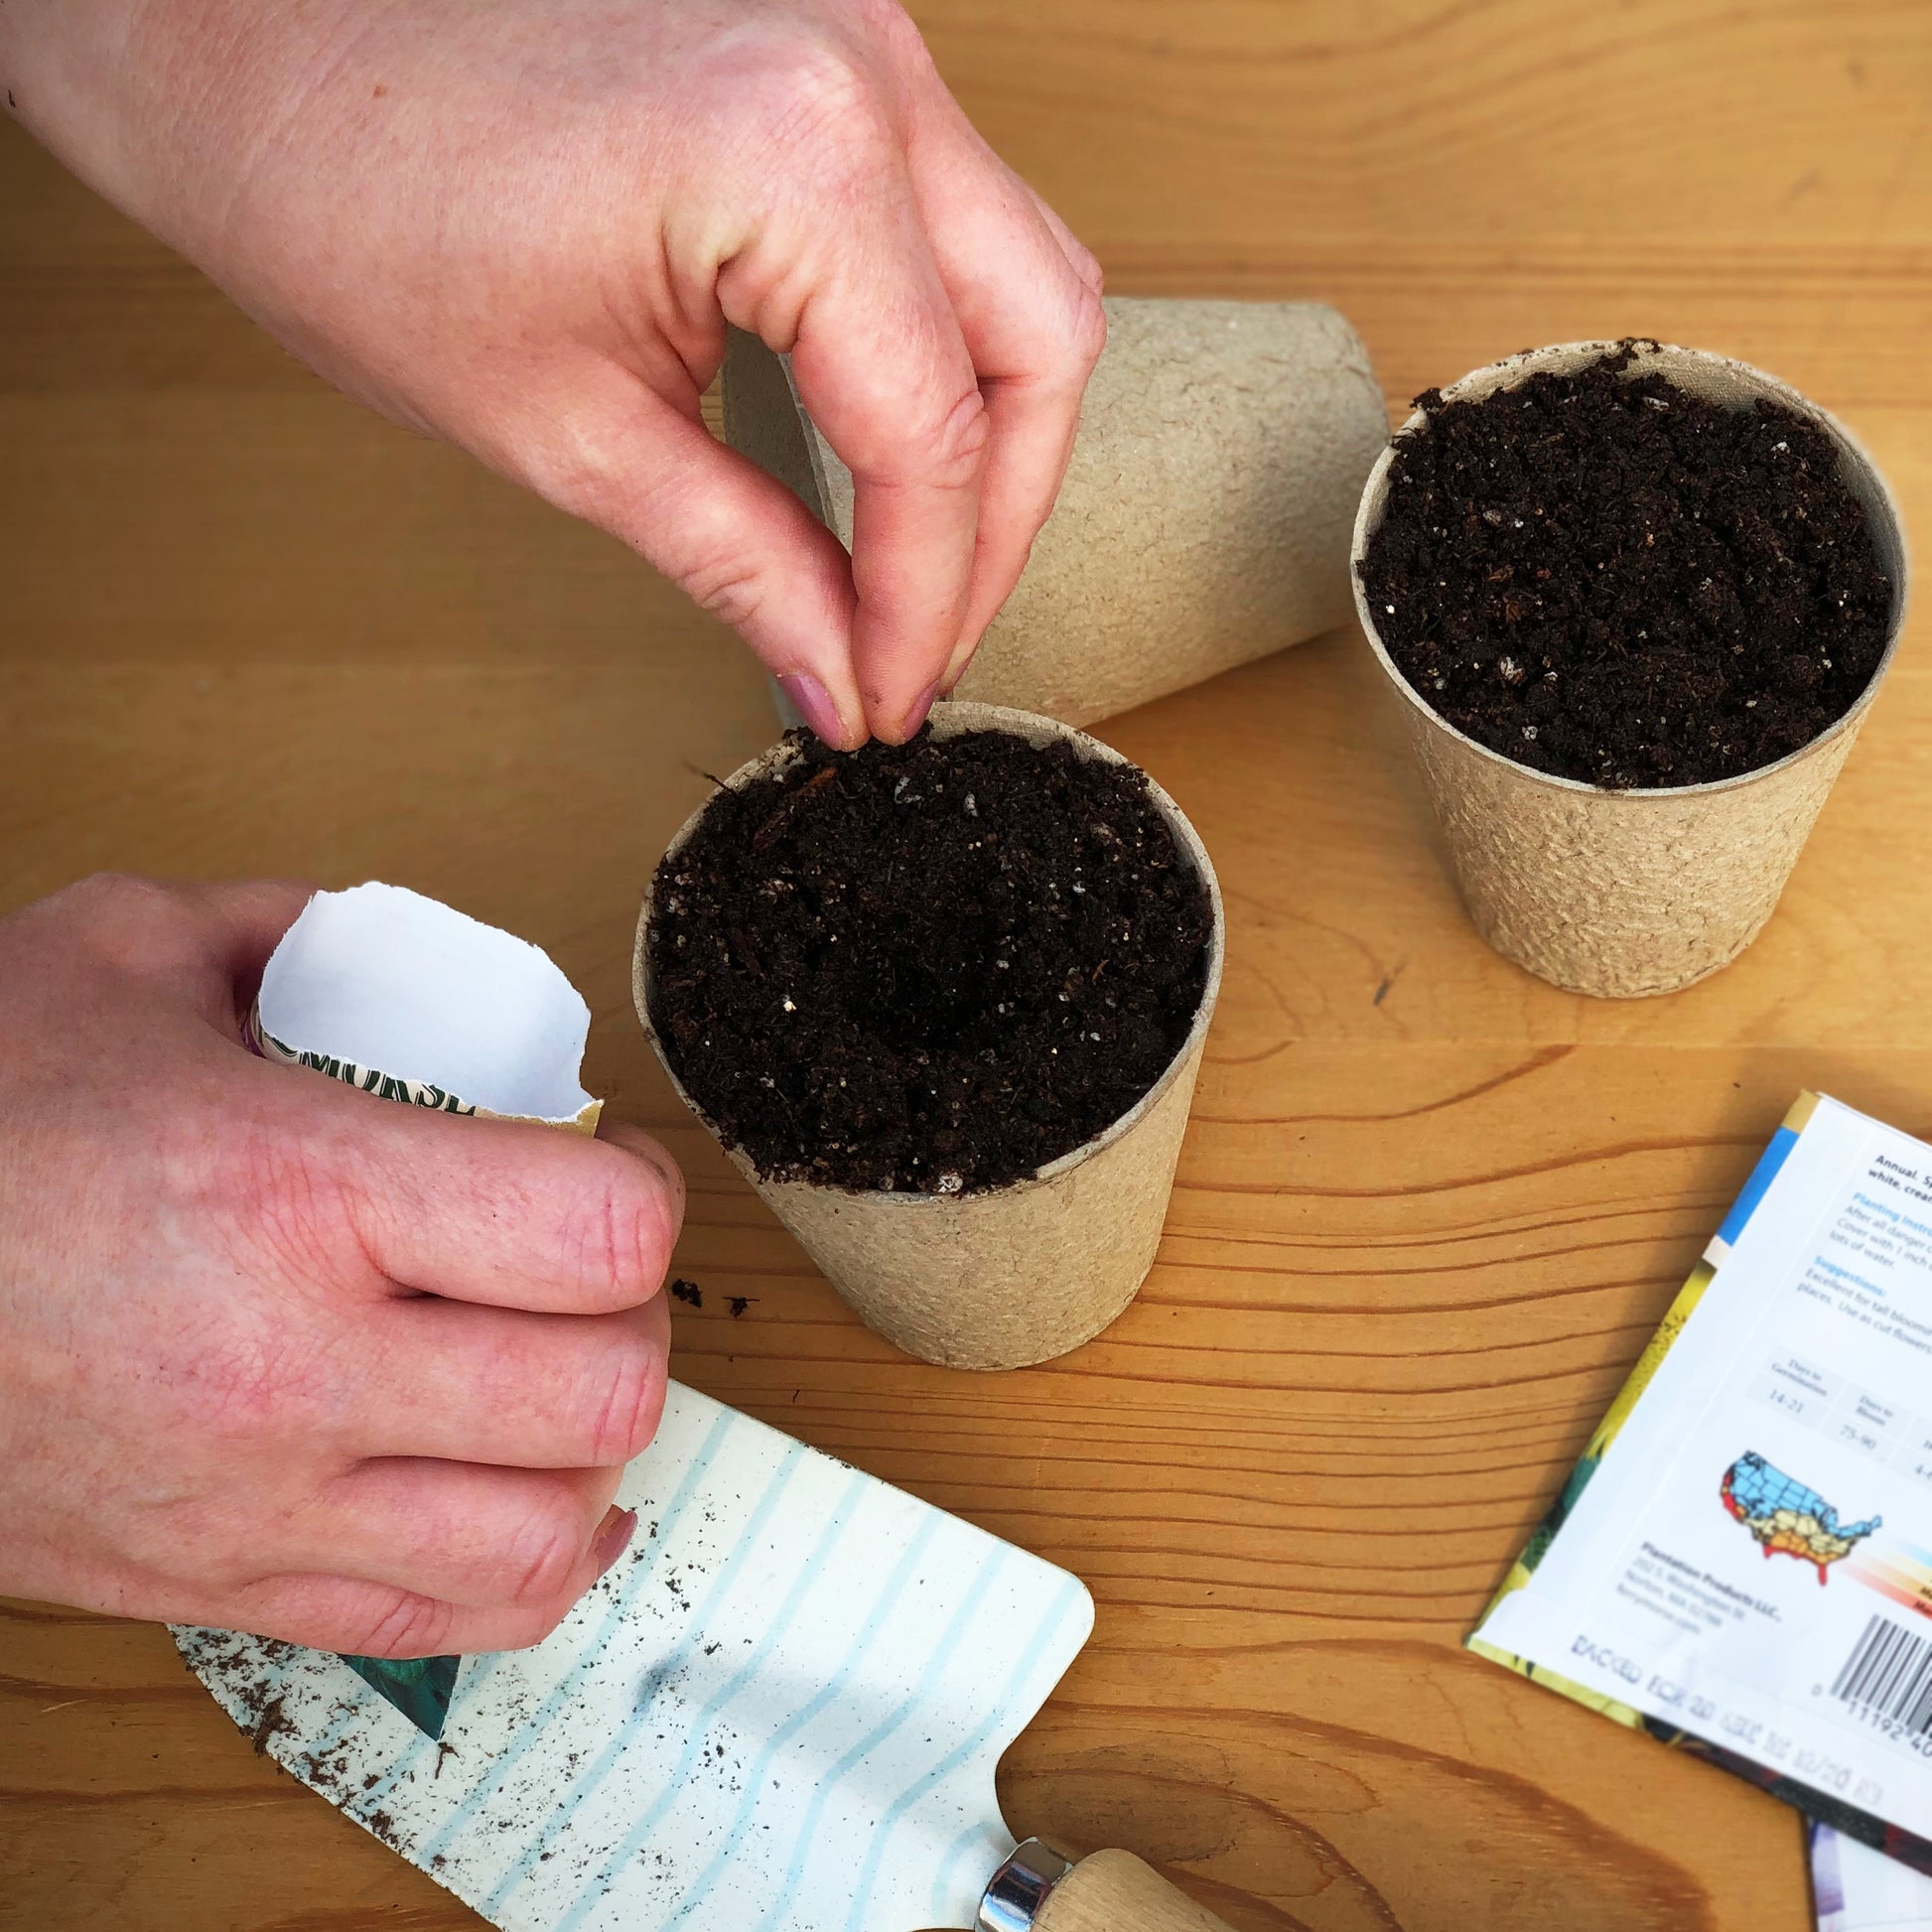 Sowing Heirloom Straight Eight Cucumber Seeds into Jiffy biodegradable seed starting peat pots filled with seed starting mix.